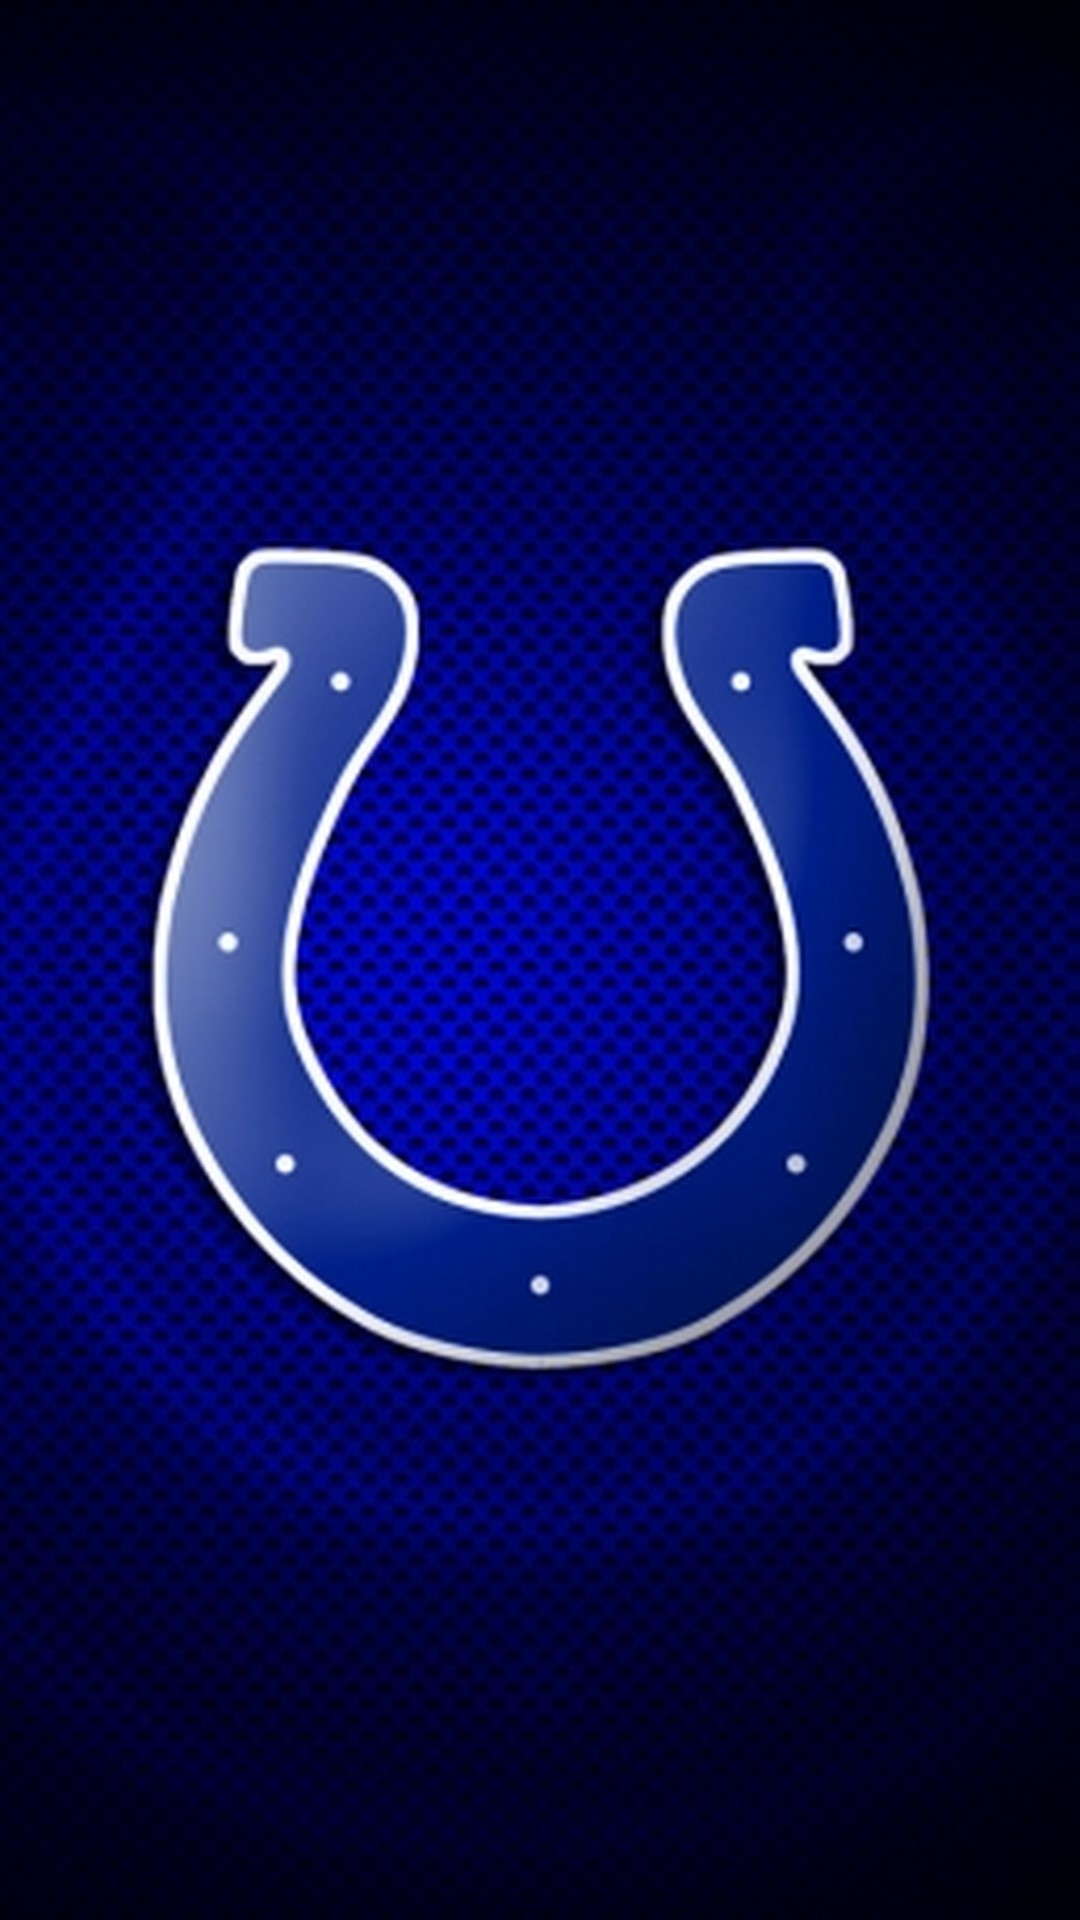 Indianapolis Colts iPhone Wallpaper New Nfl